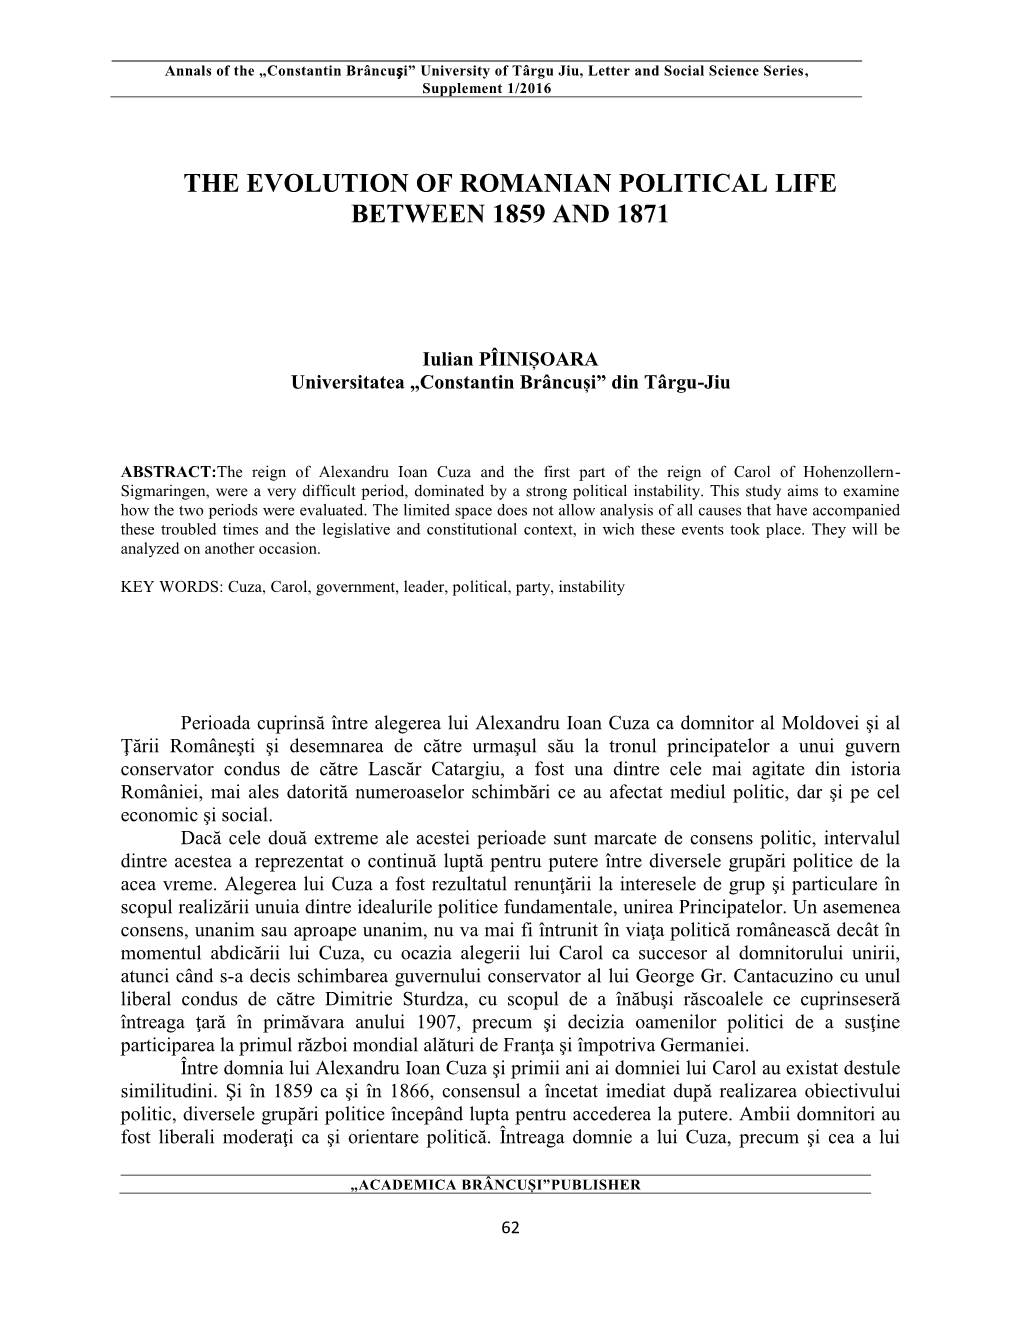 The Evolution of Romanian Political Life Between 1859 and 1871